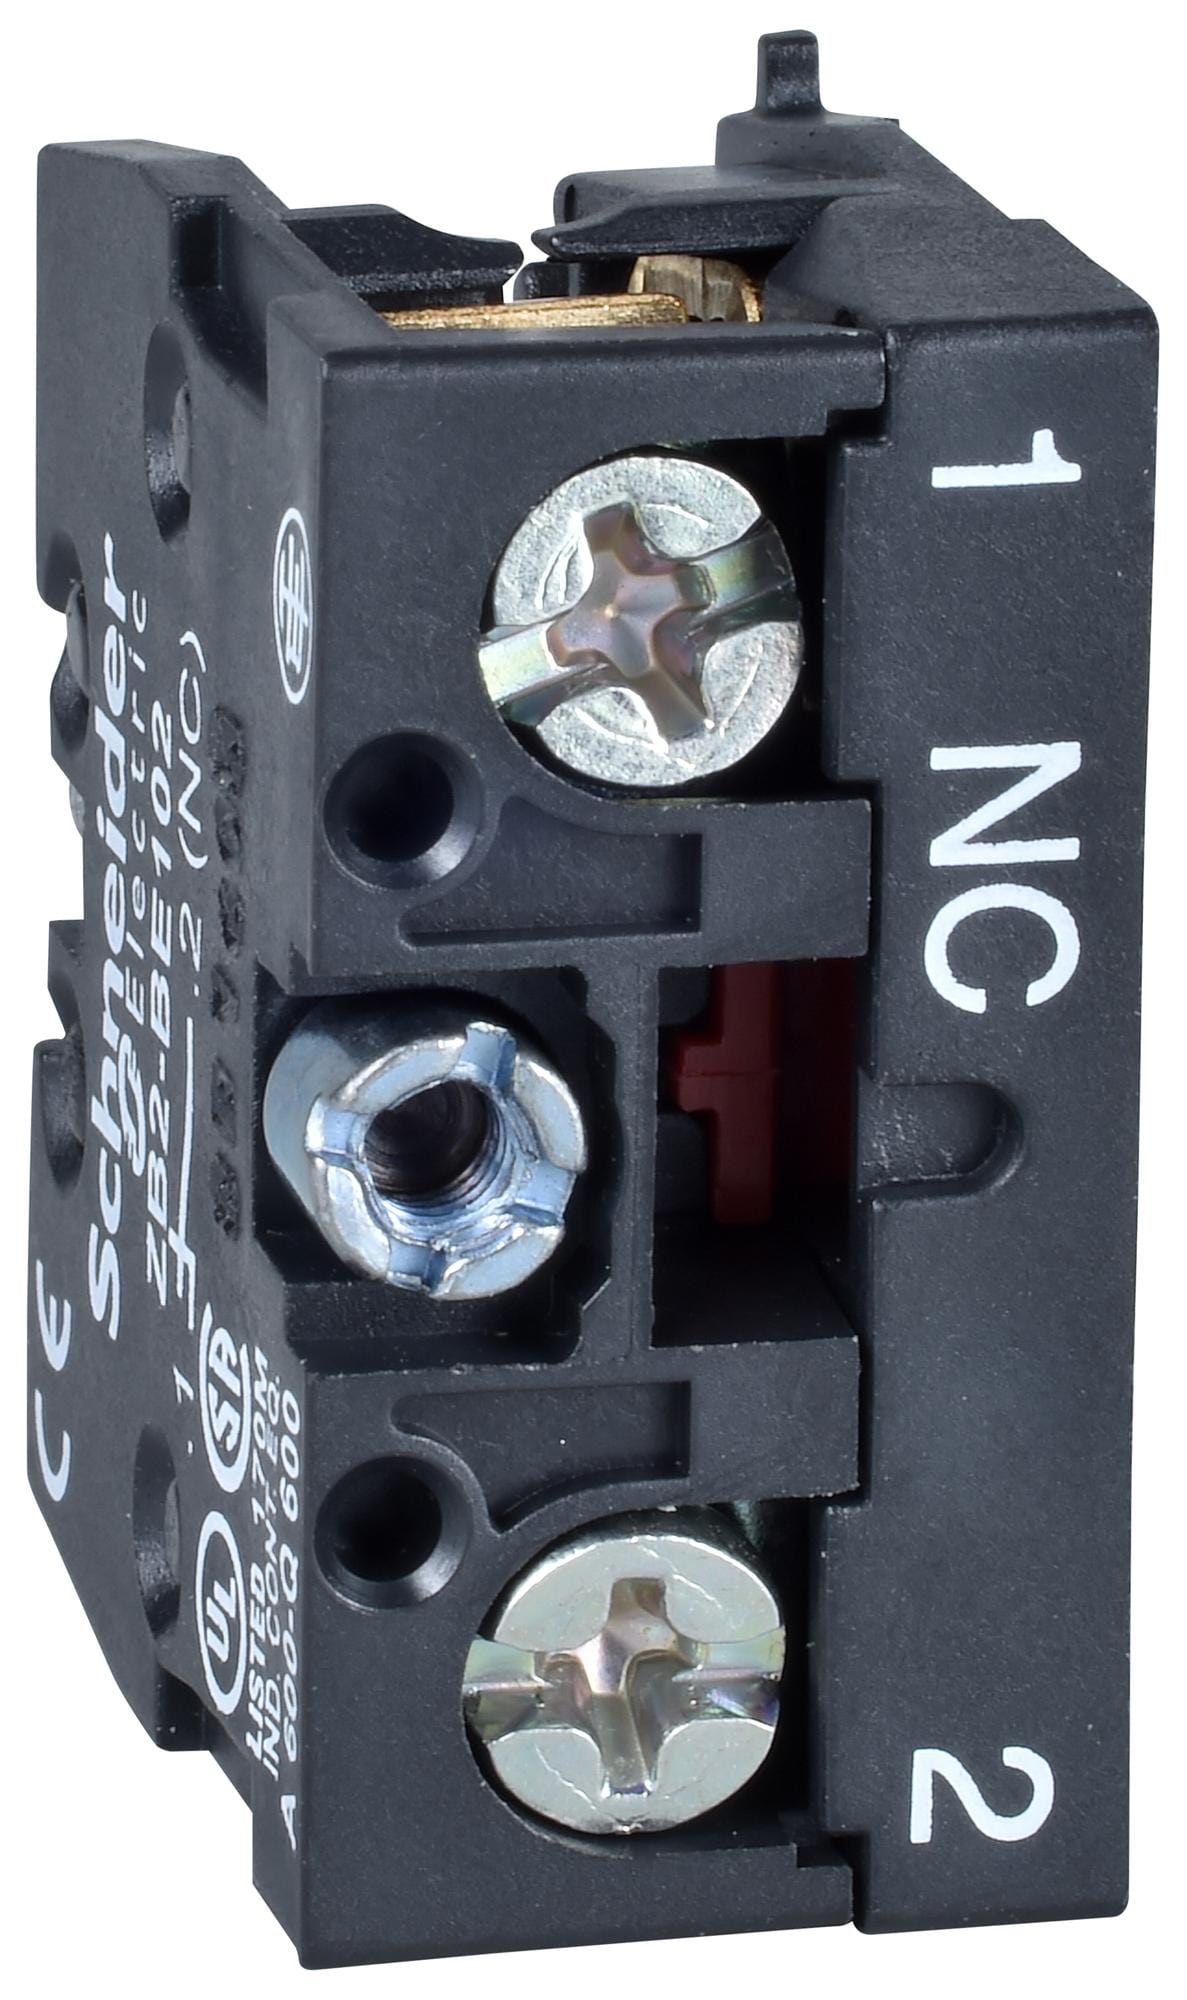 SCHNEIDER ELECTRIC Contact Blocks ZB2BE201 CONTACT BLOCK, 1POLE, SCREW CLAMP SCHNEIDER ELECTRIC 3114888 ZB2BE201